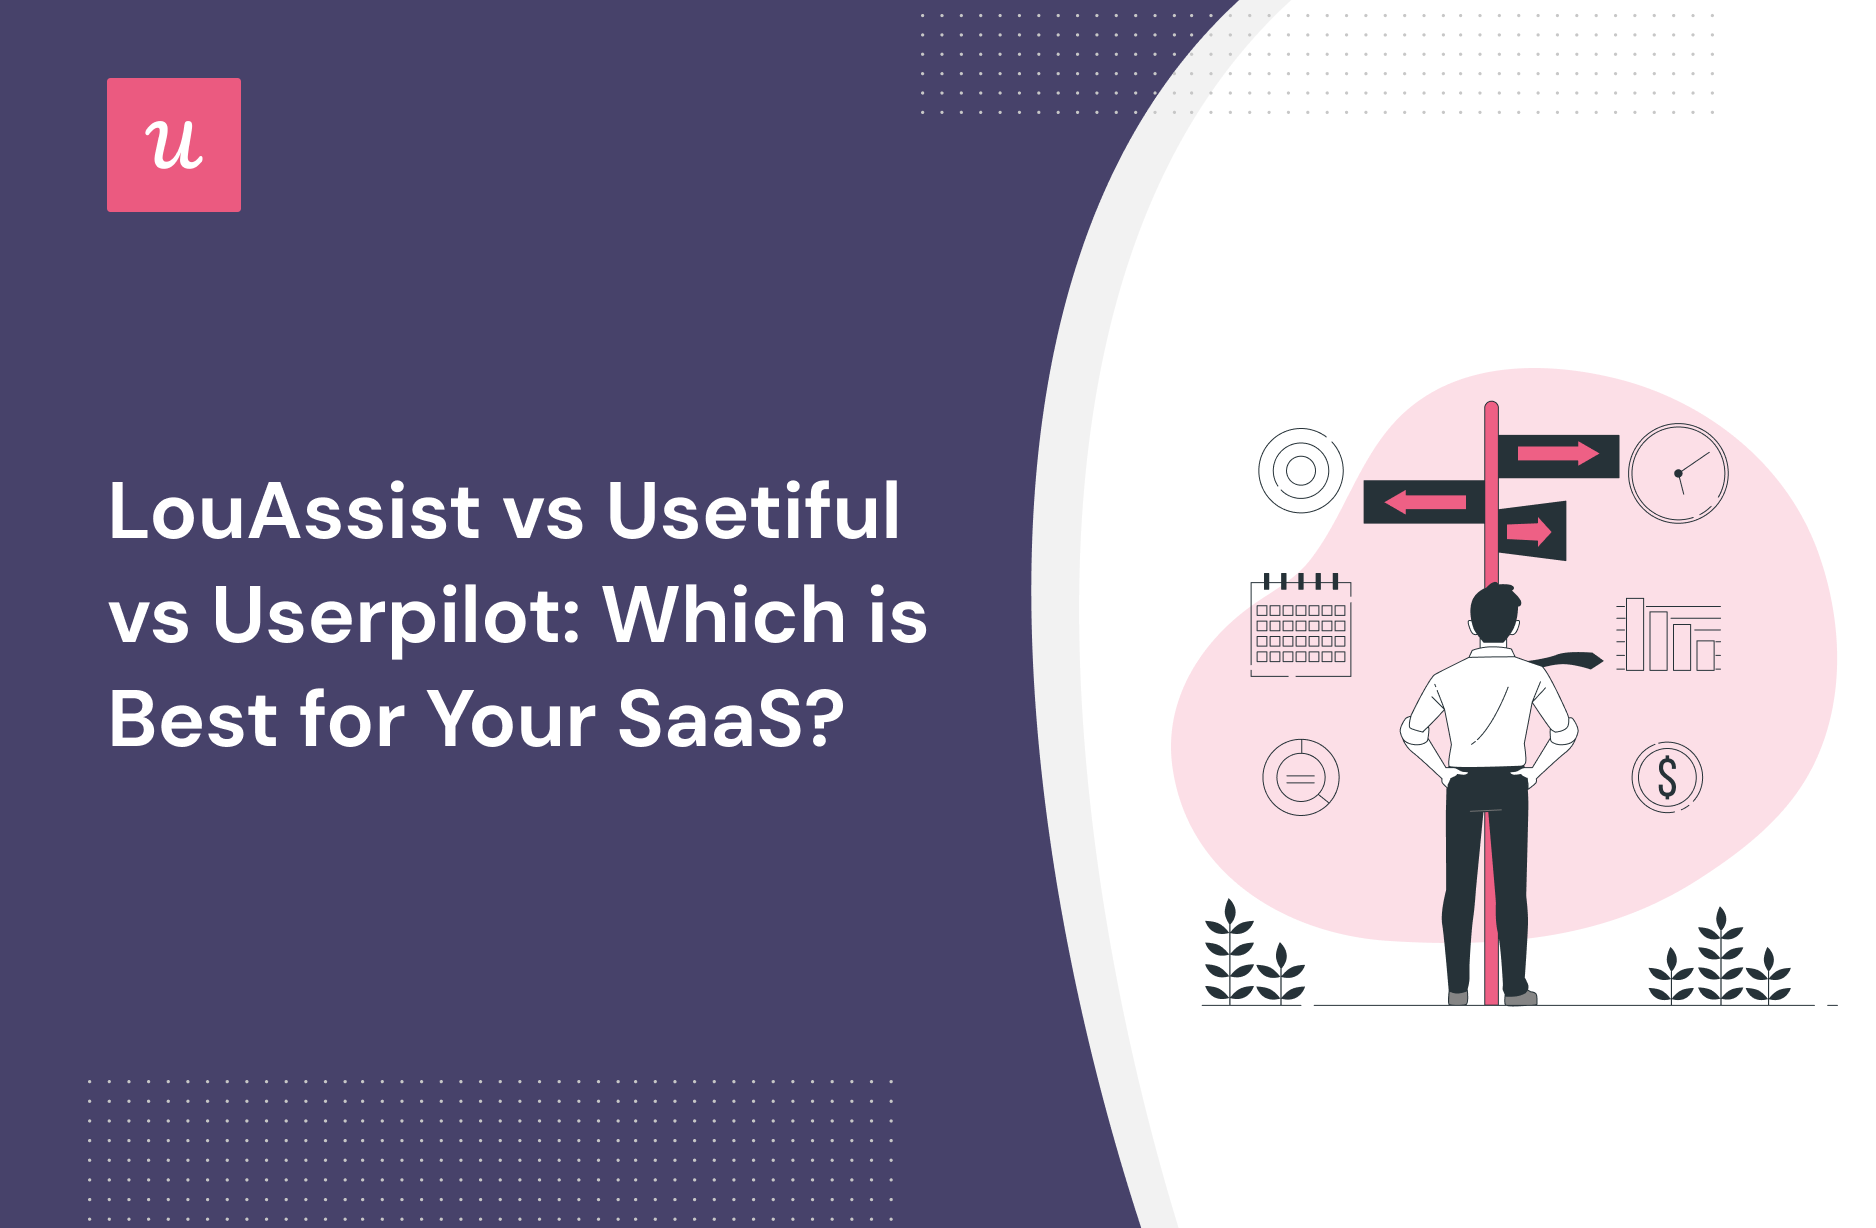 LouAssist vs Usetiful vs Userpilot: Which is Best for Your SaaS?